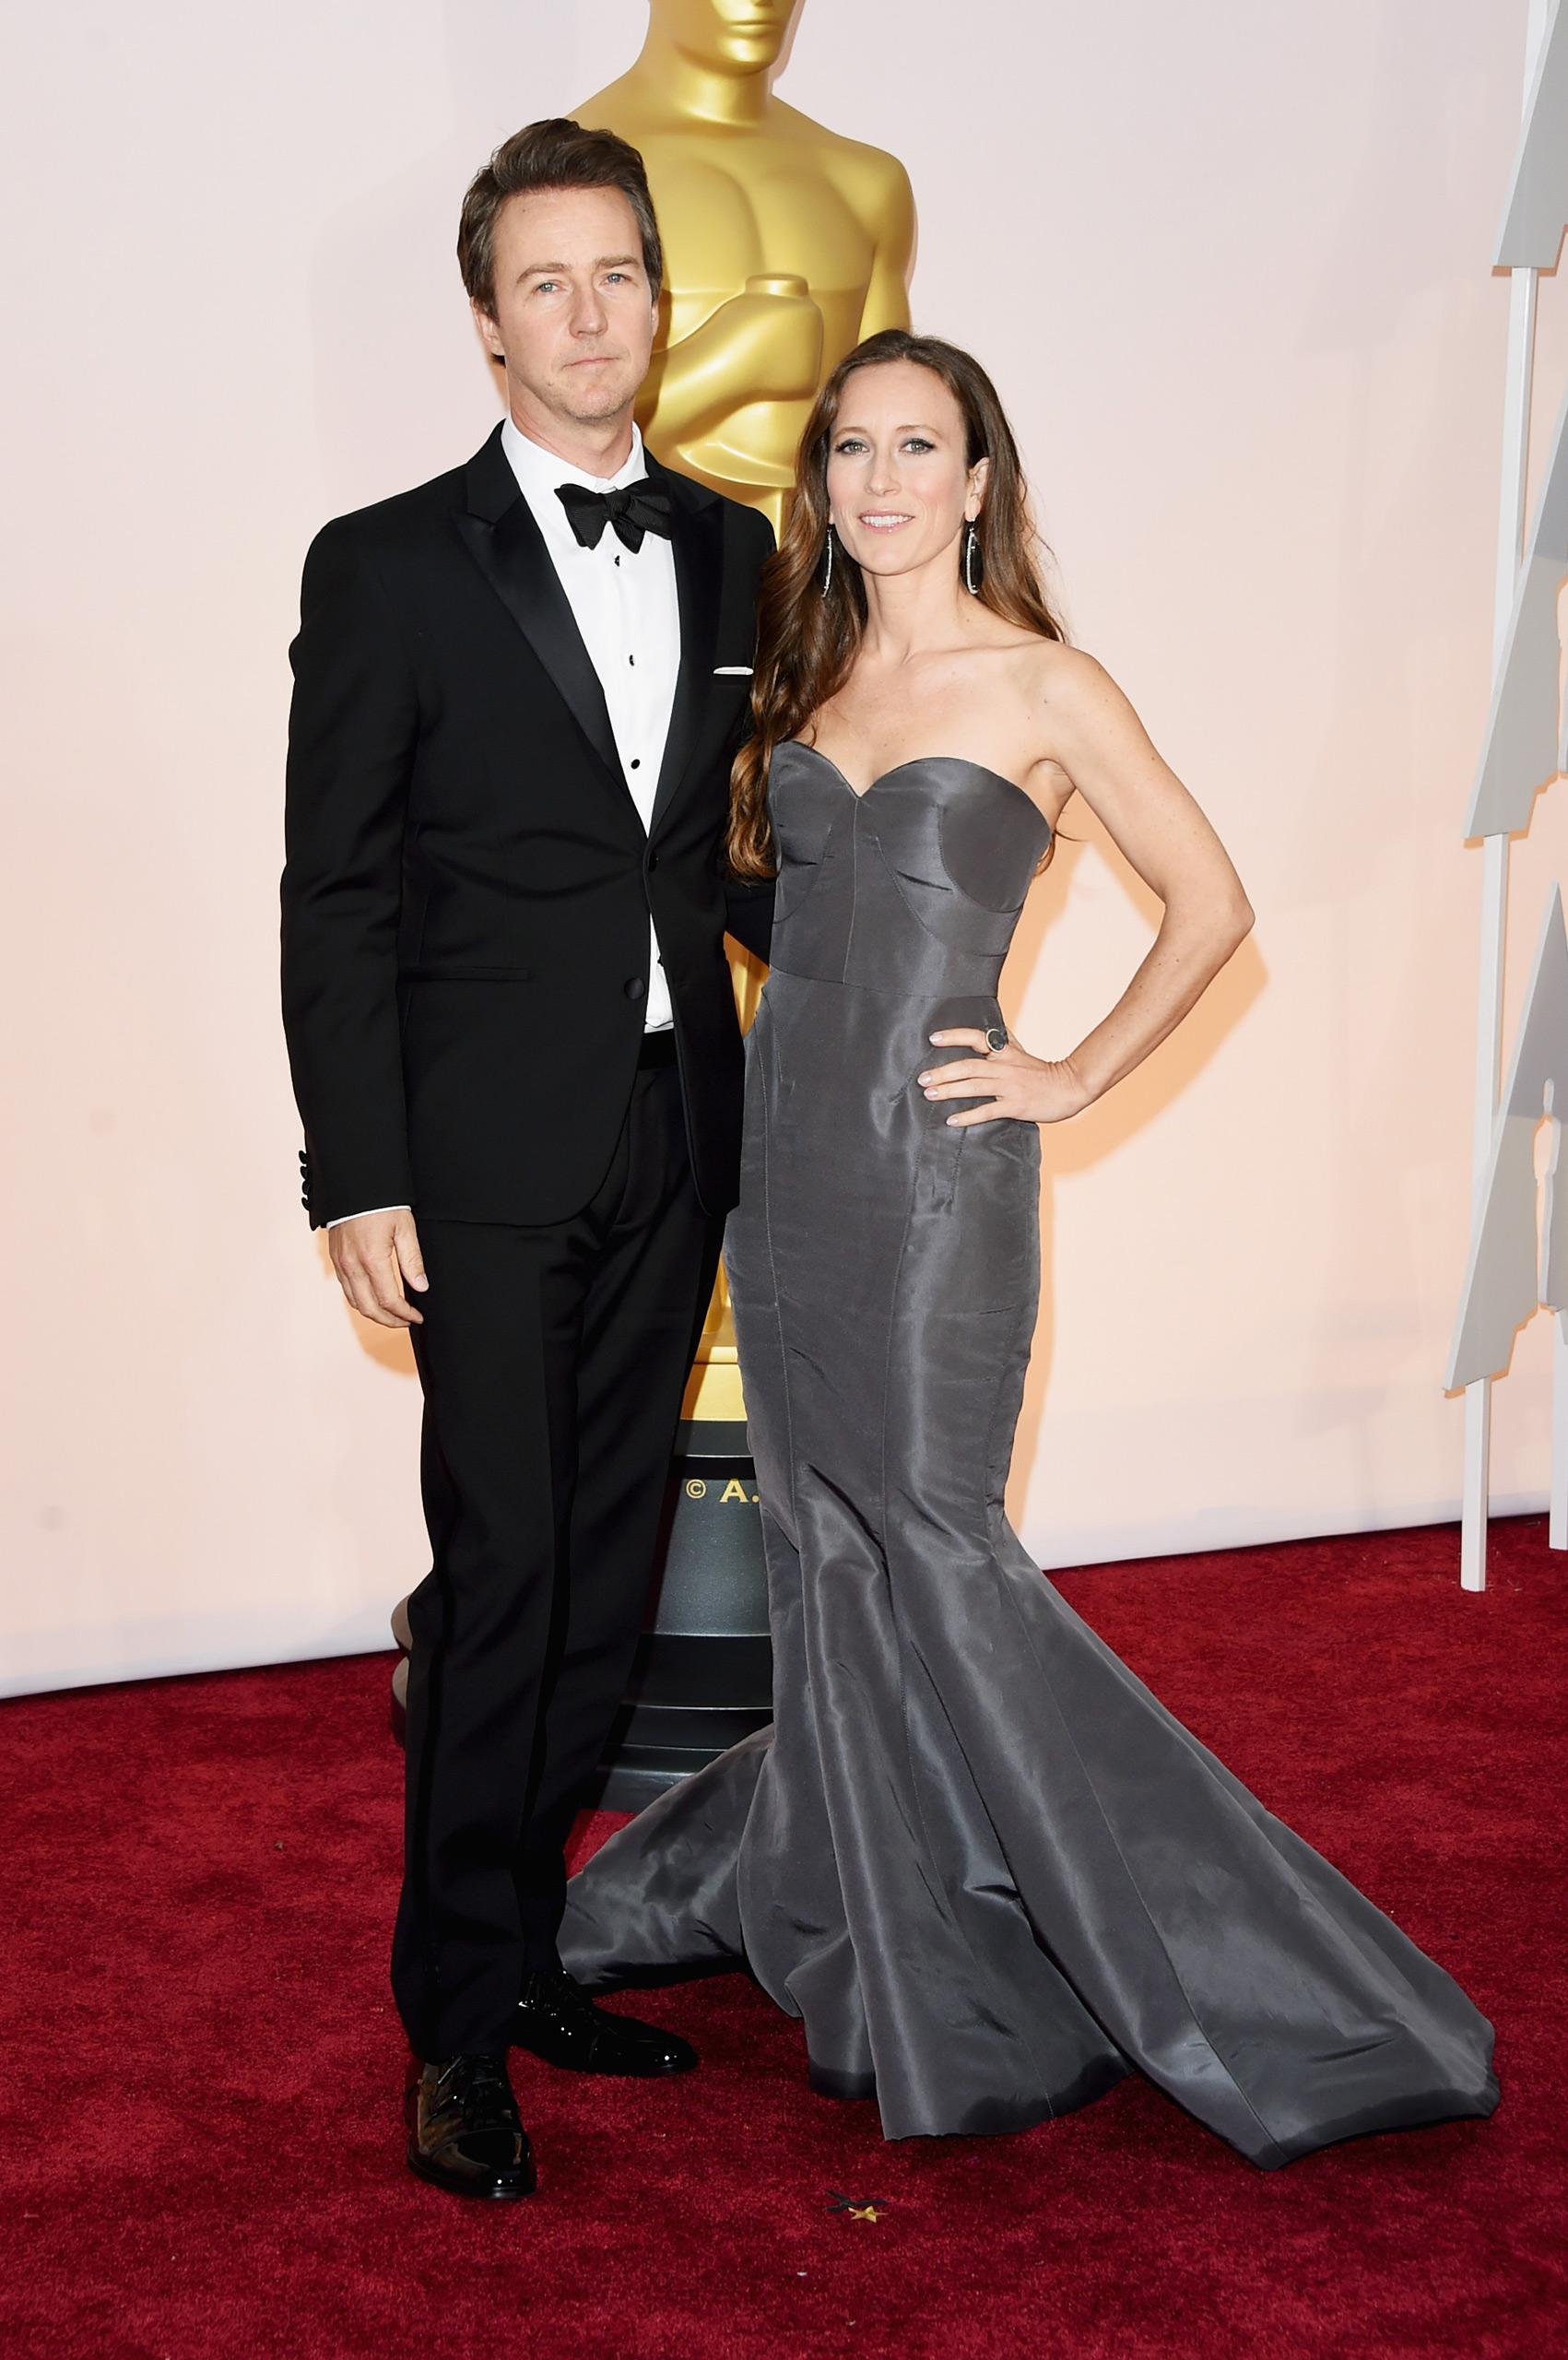 Ed Norton and Shauna Robertson attend the 87th Annual Academy Awards on Feb. 22, 2015 in Hollywood, Calif.